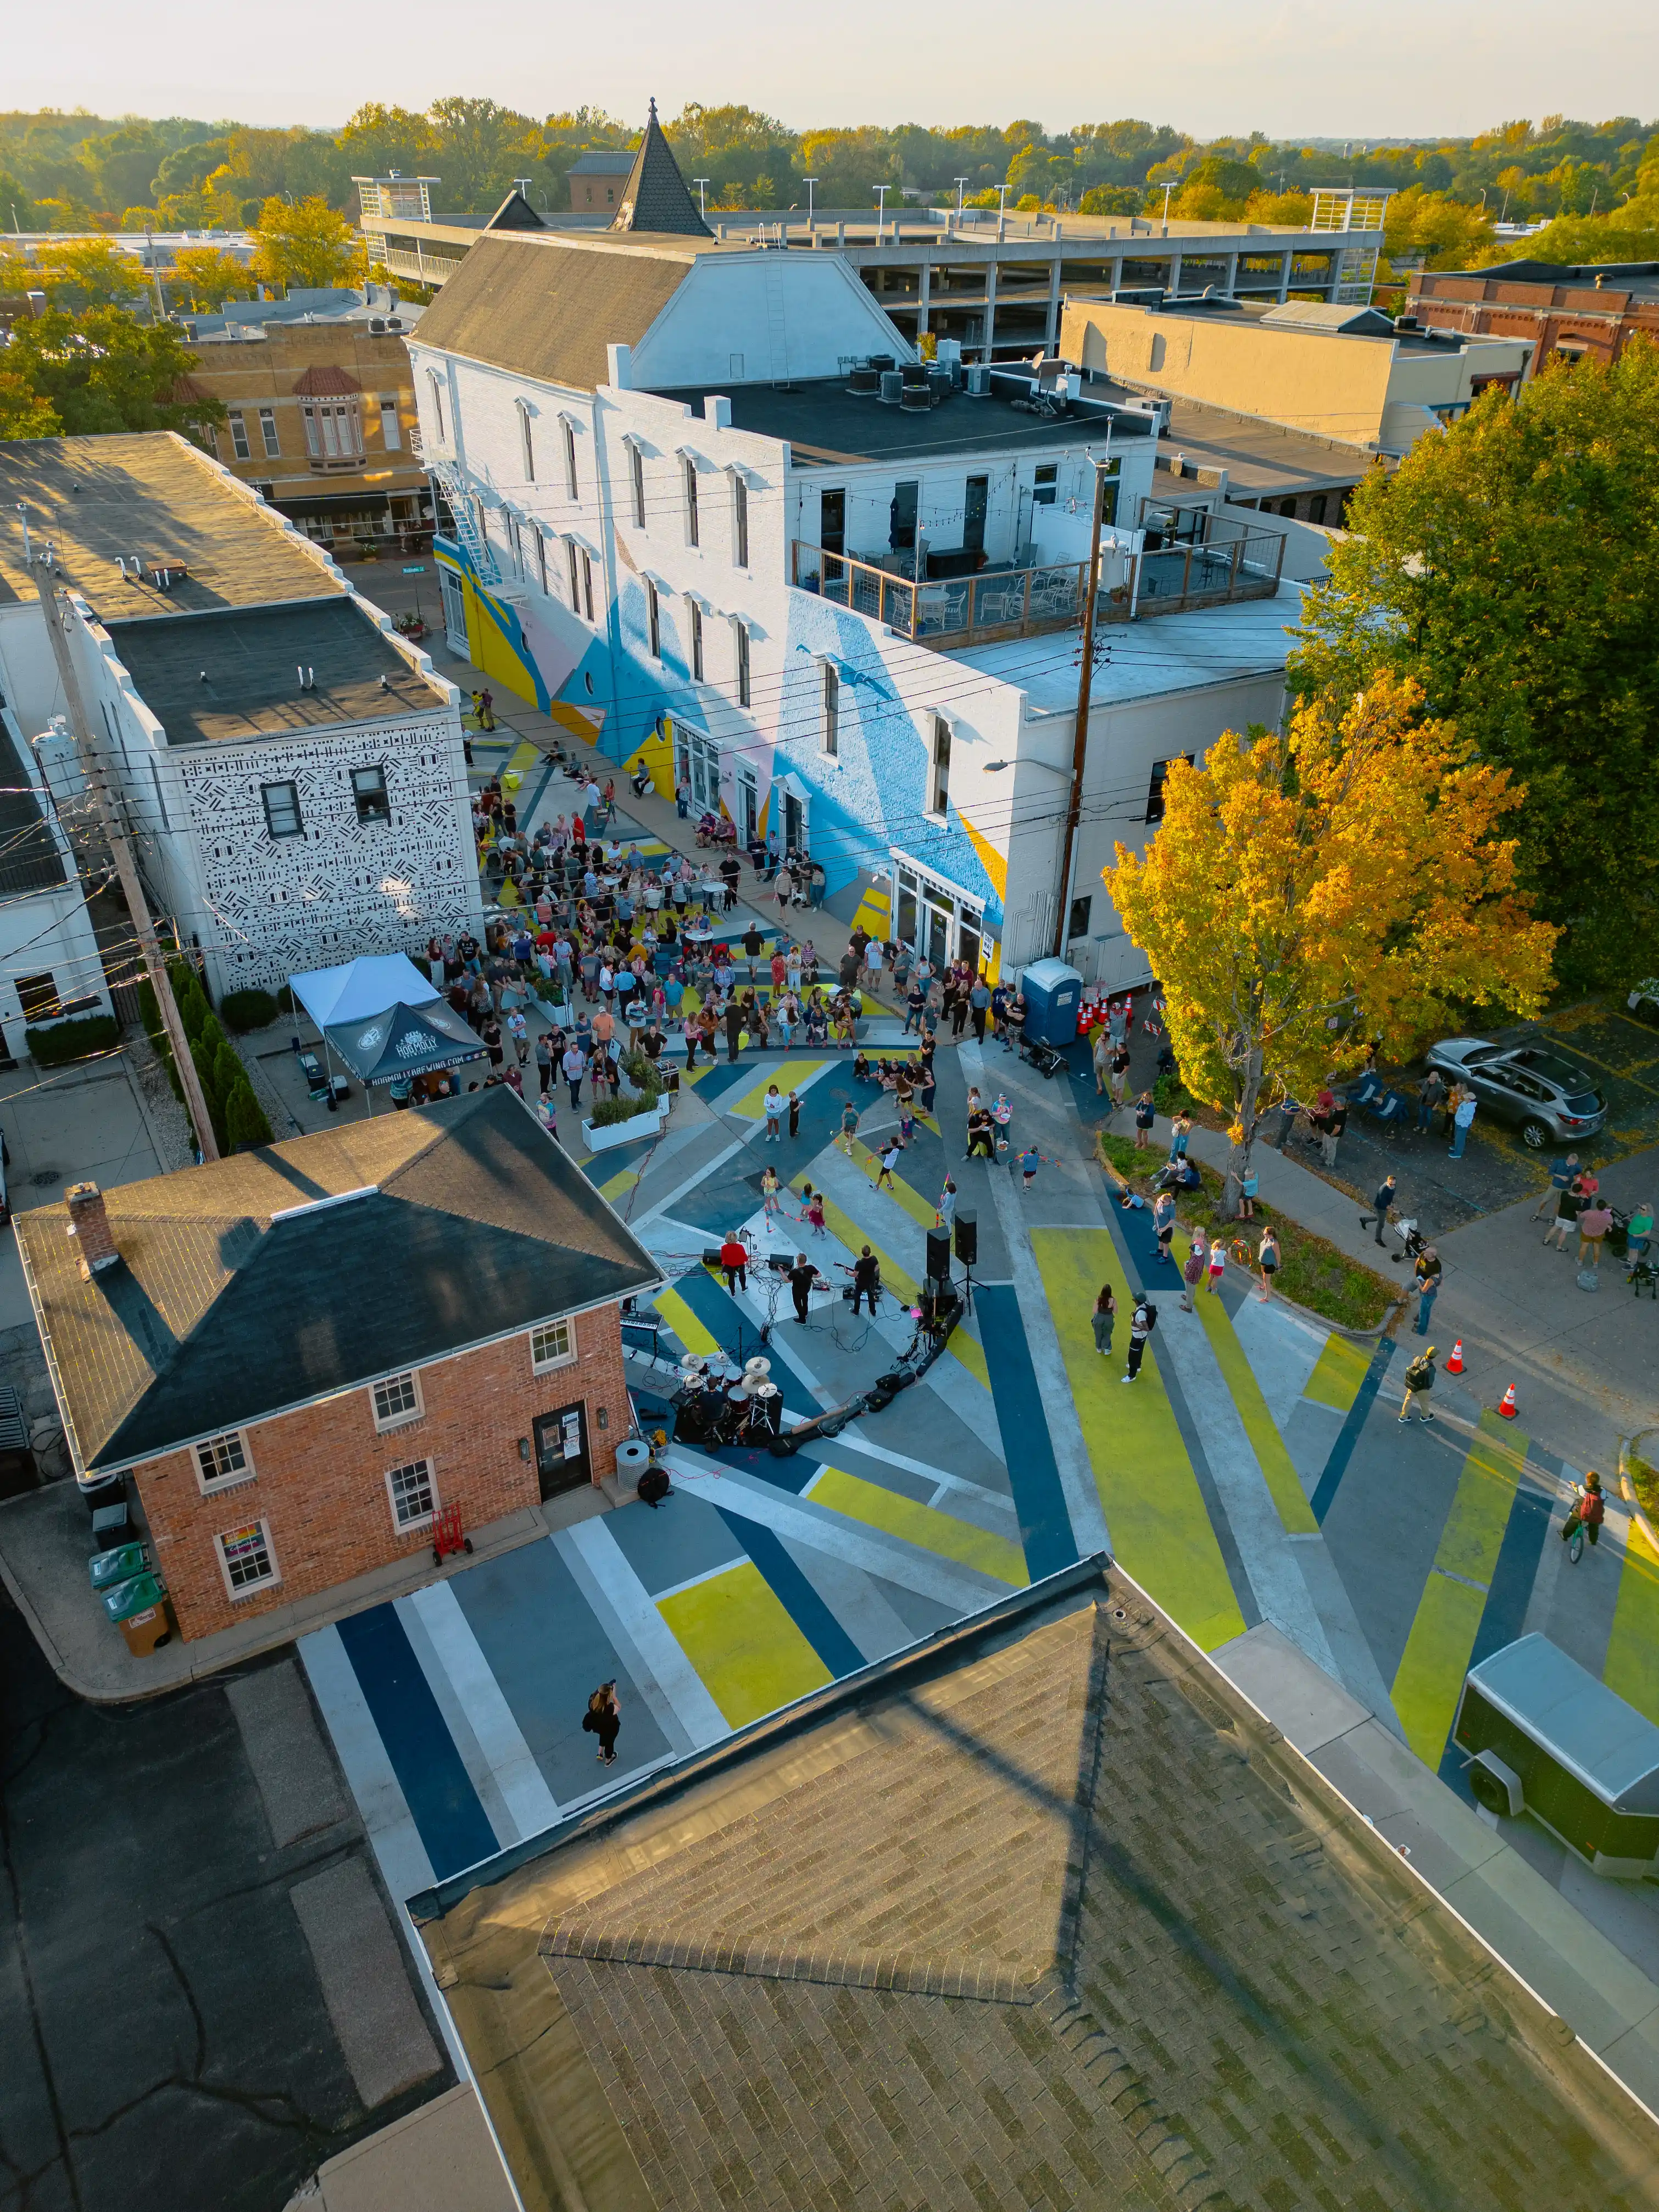 Aerial view of an outdoor street art installation with geometric patterns on pavements and walls in an urban setting, with people interacting with the space.